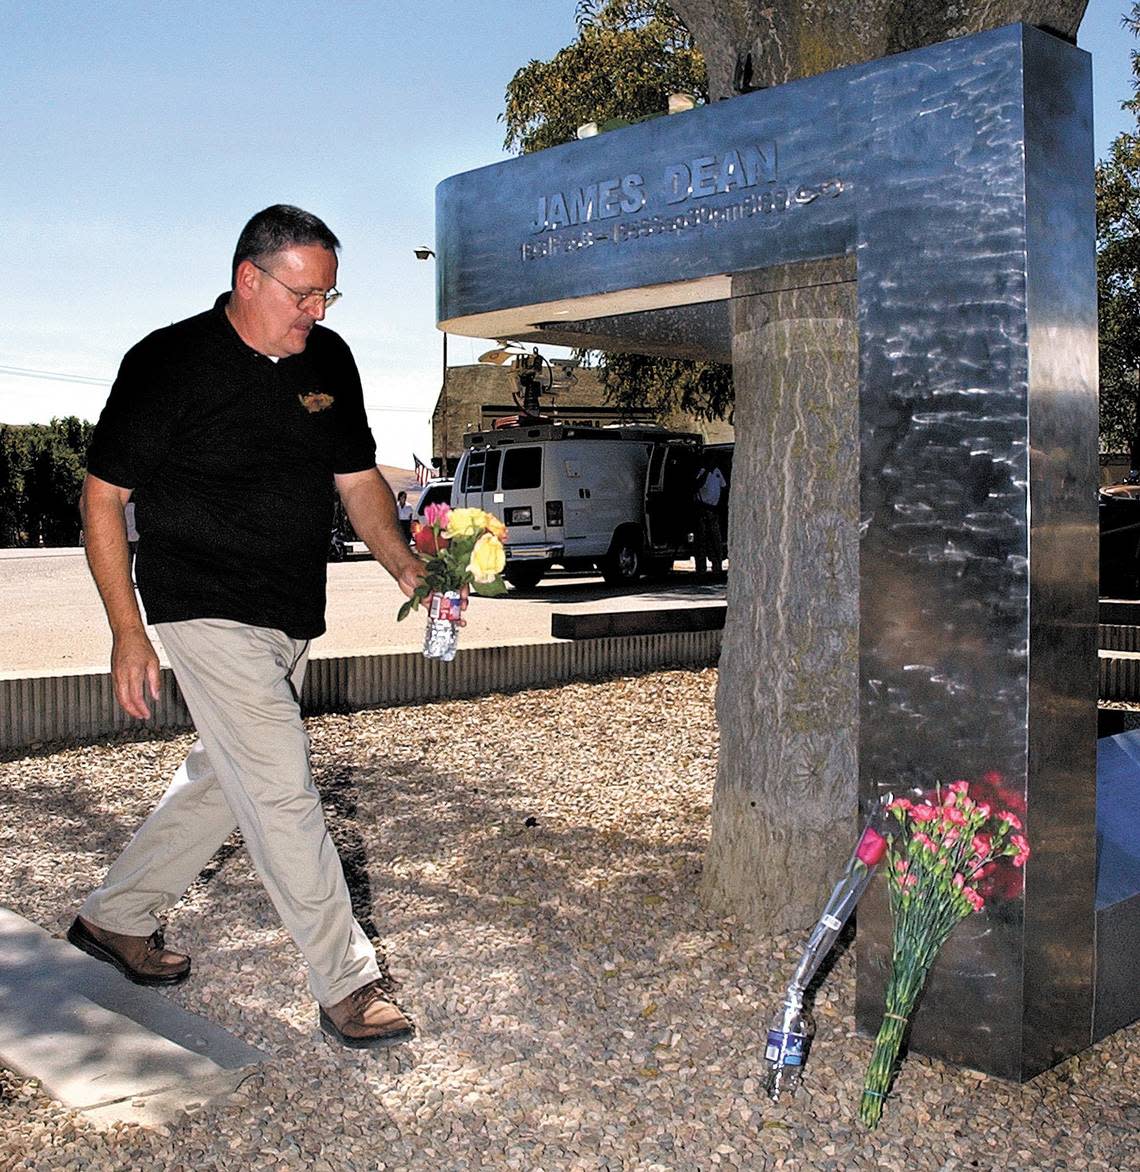 Eugene Pellegrini of Capitola places flowers at the James Dean memorial in Cholame in 2005. Dean died in a car crash near there in 1955.